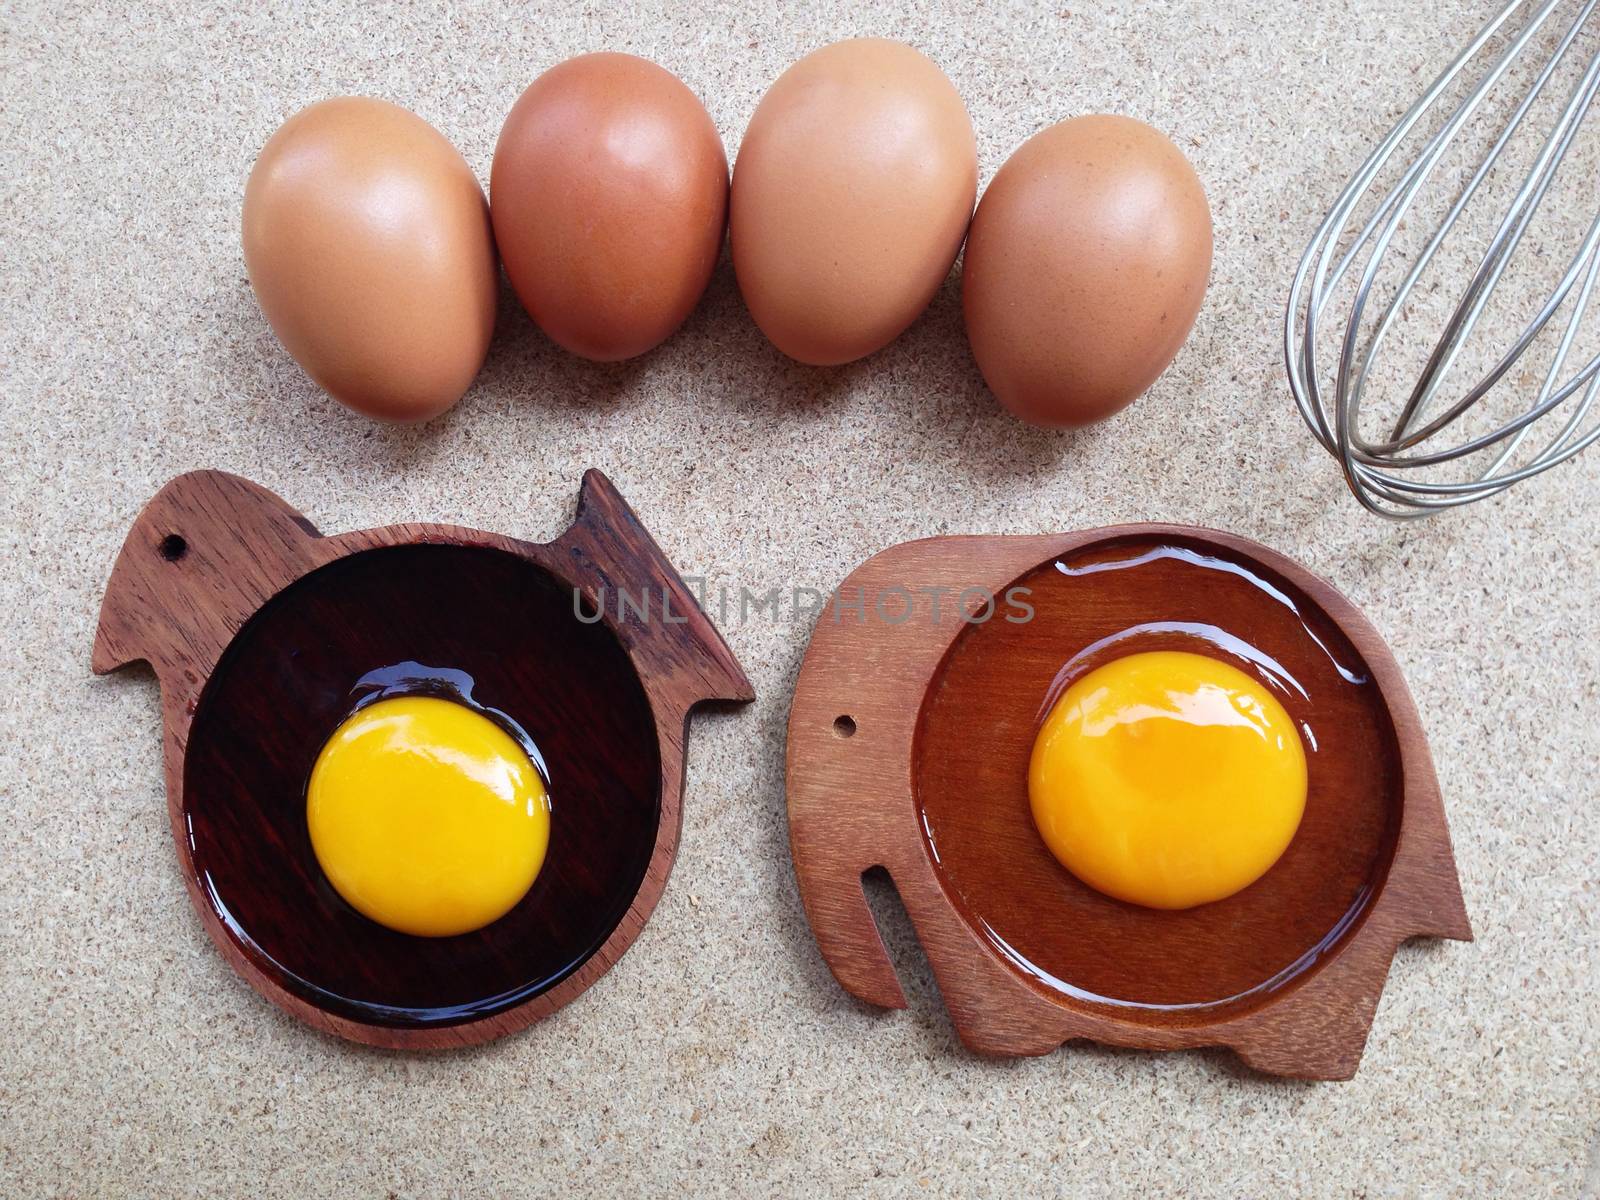 Egg yolk on wooden chicken shaped saucer and yolk egg on wooden  by Bowonpat